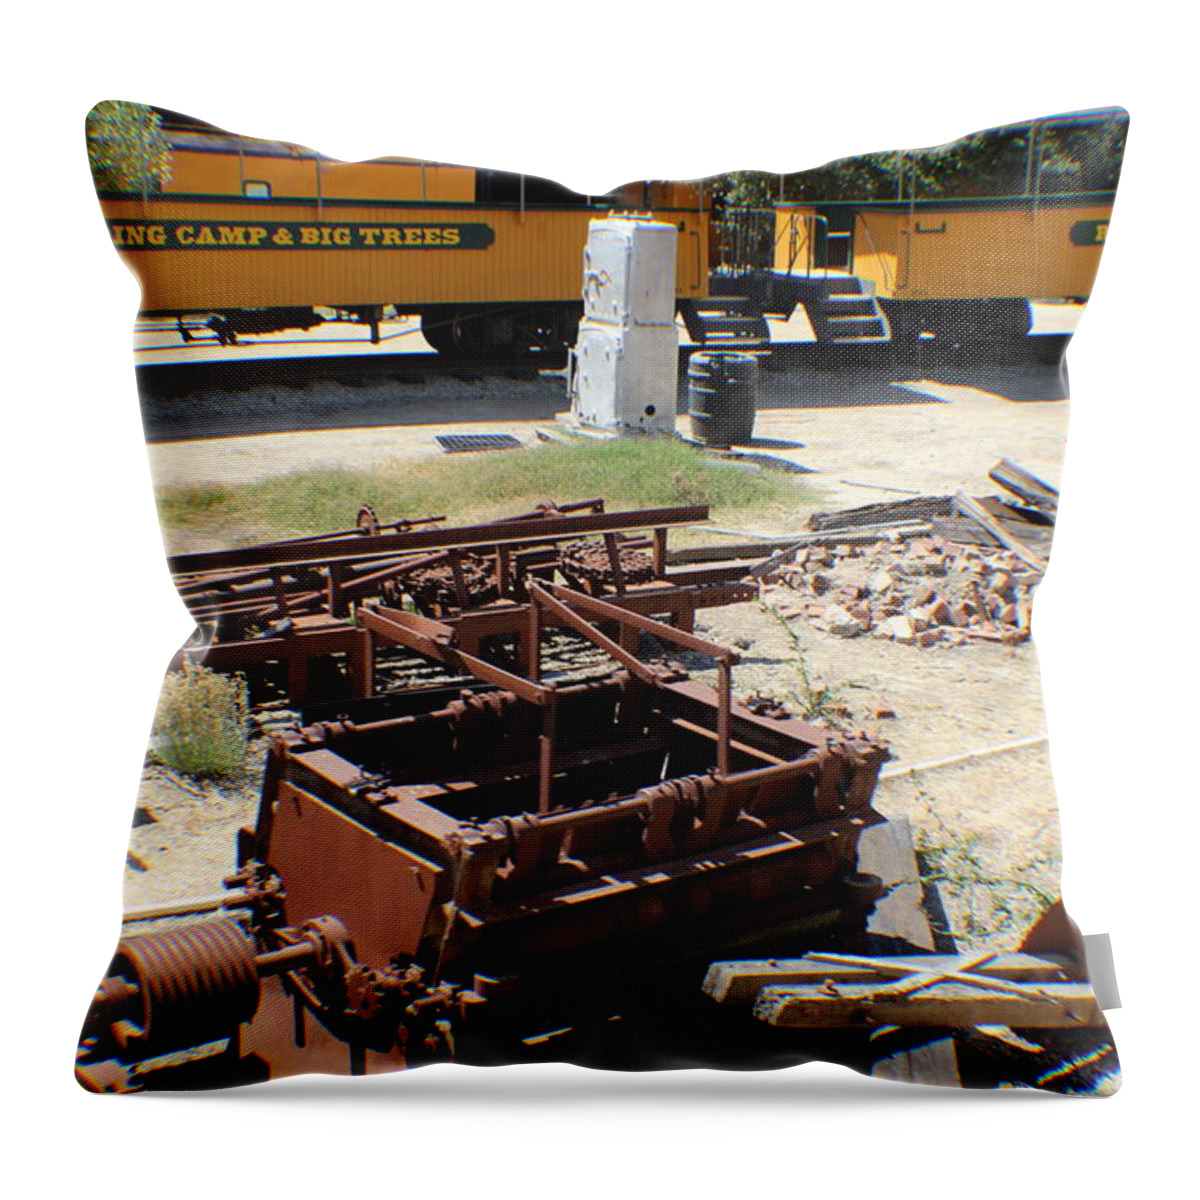 Roaring Camp And Big Trees Railroad Throw Pillow featuring the photograph Roaring Camp and Big Trees Railroad by John Mathews